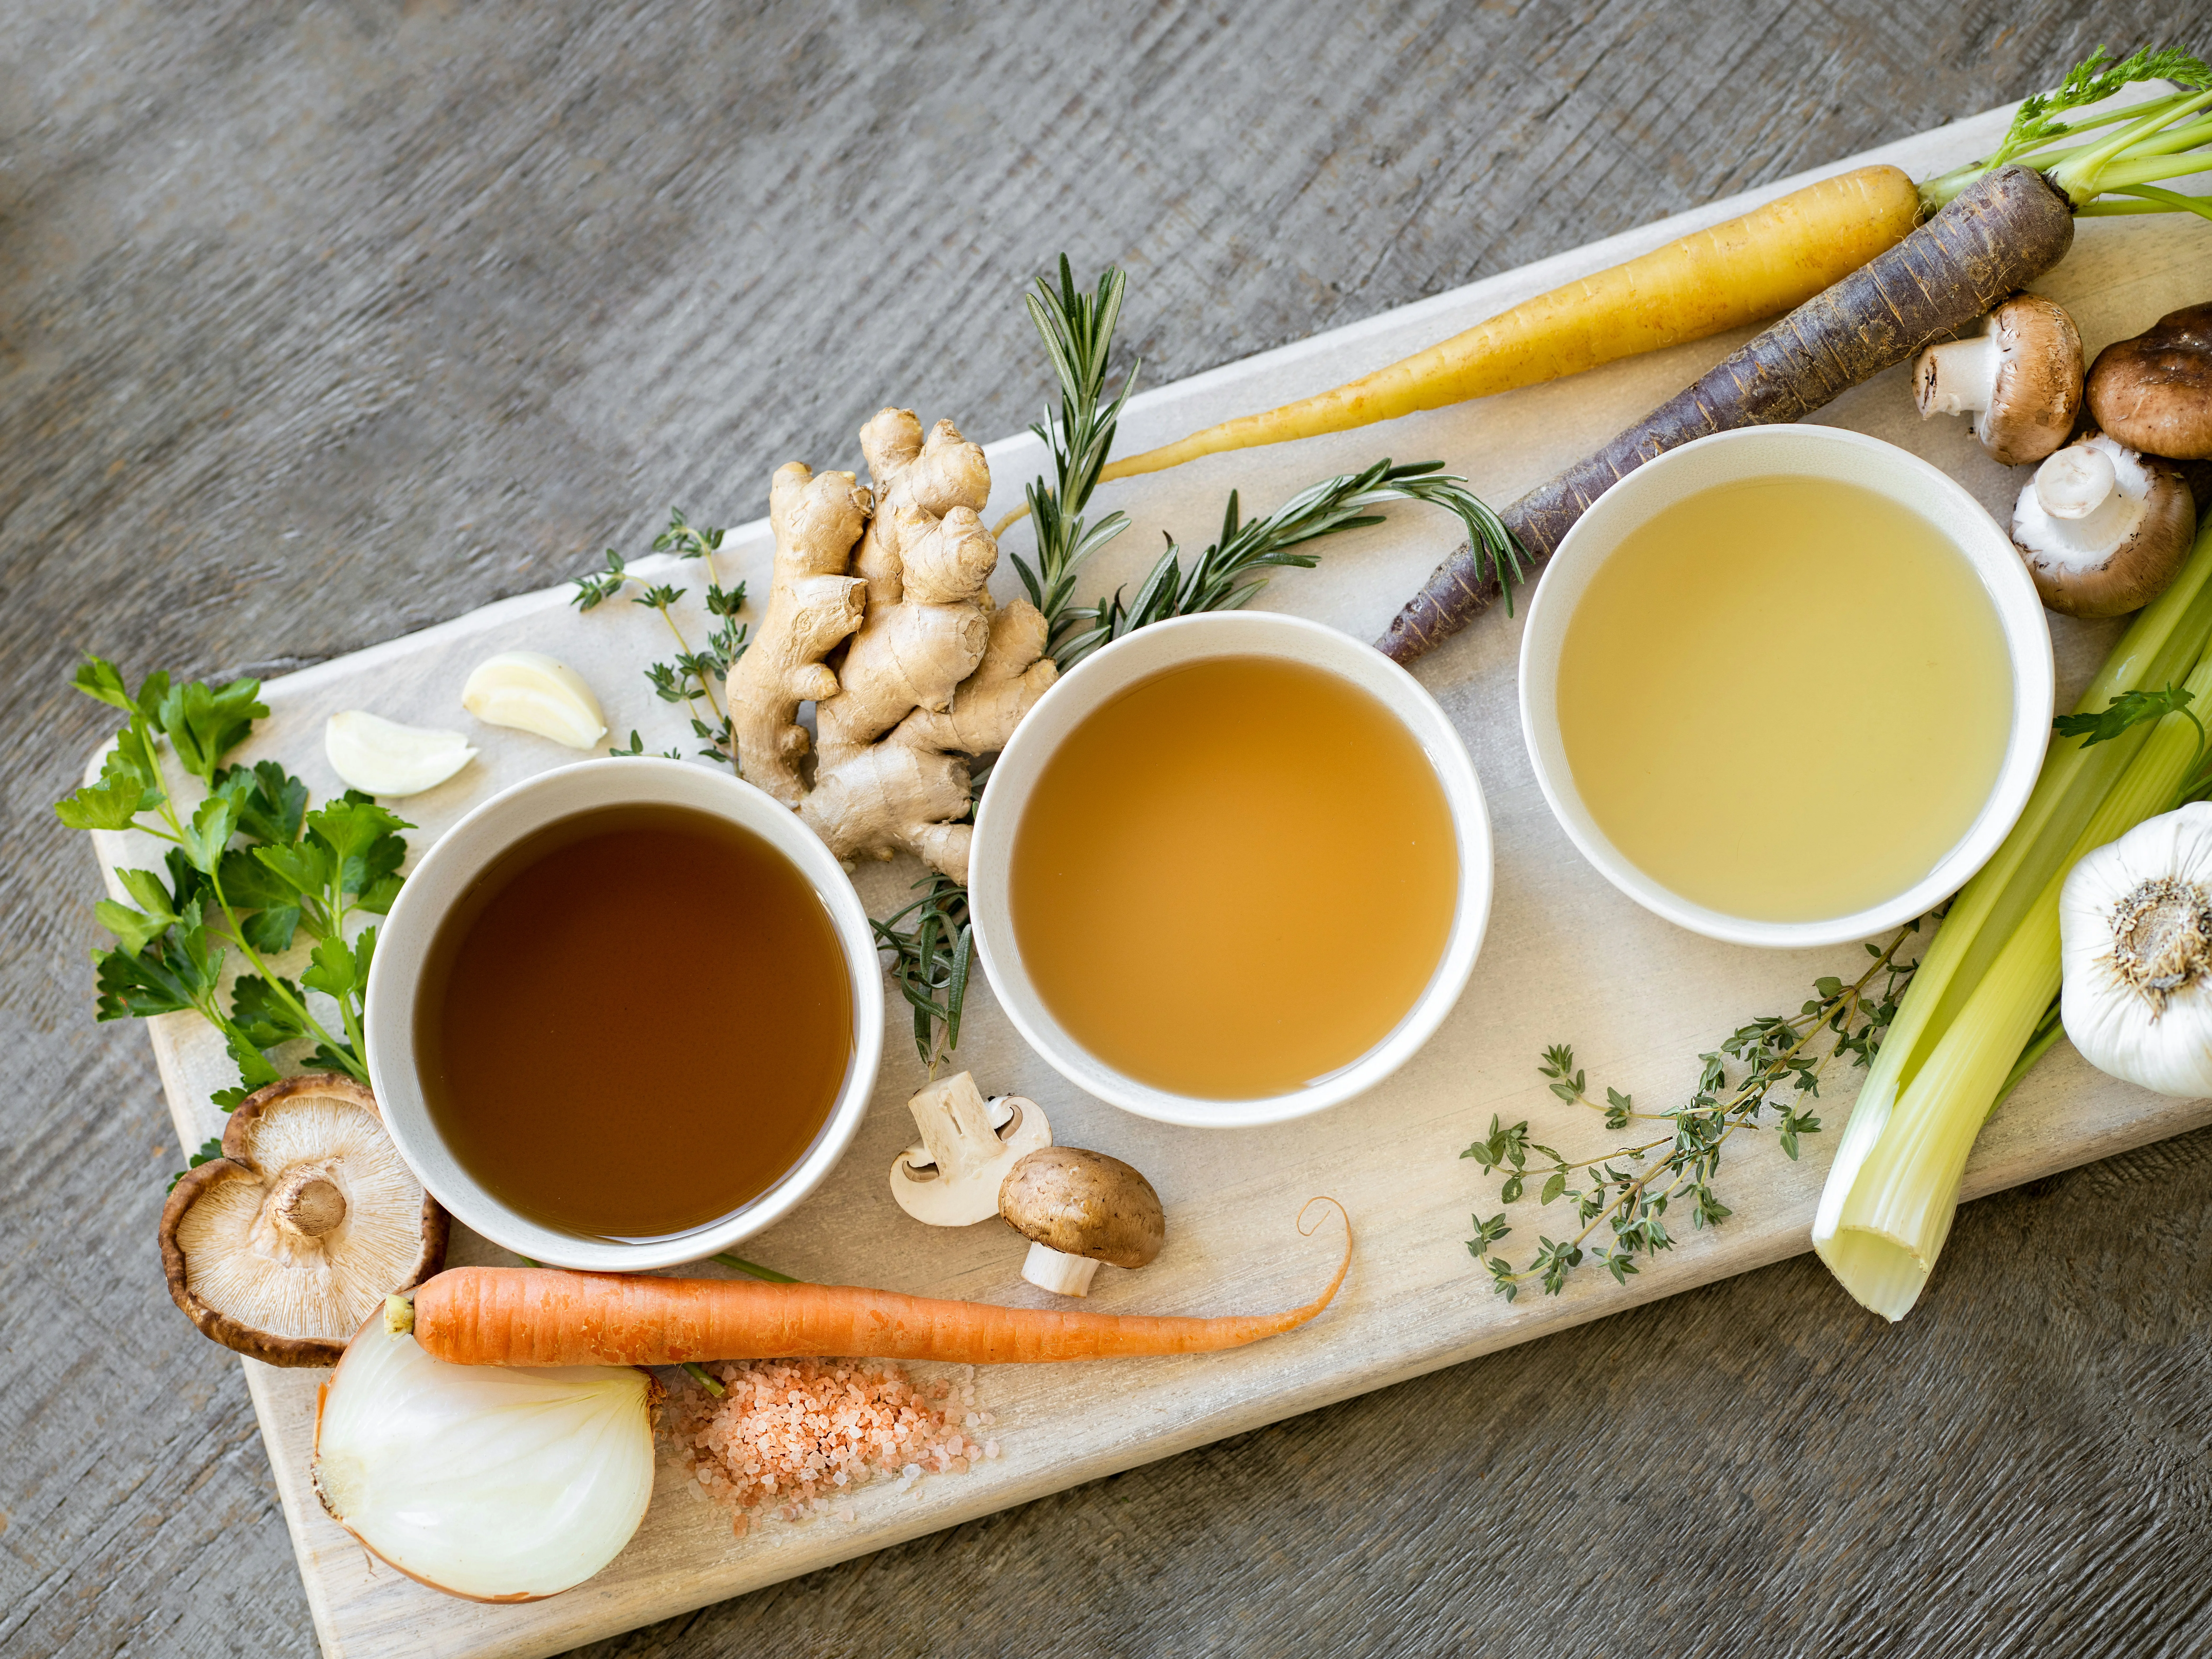 Chicken bone broth rich in collagen and other nutrients useful for postpartum recovery